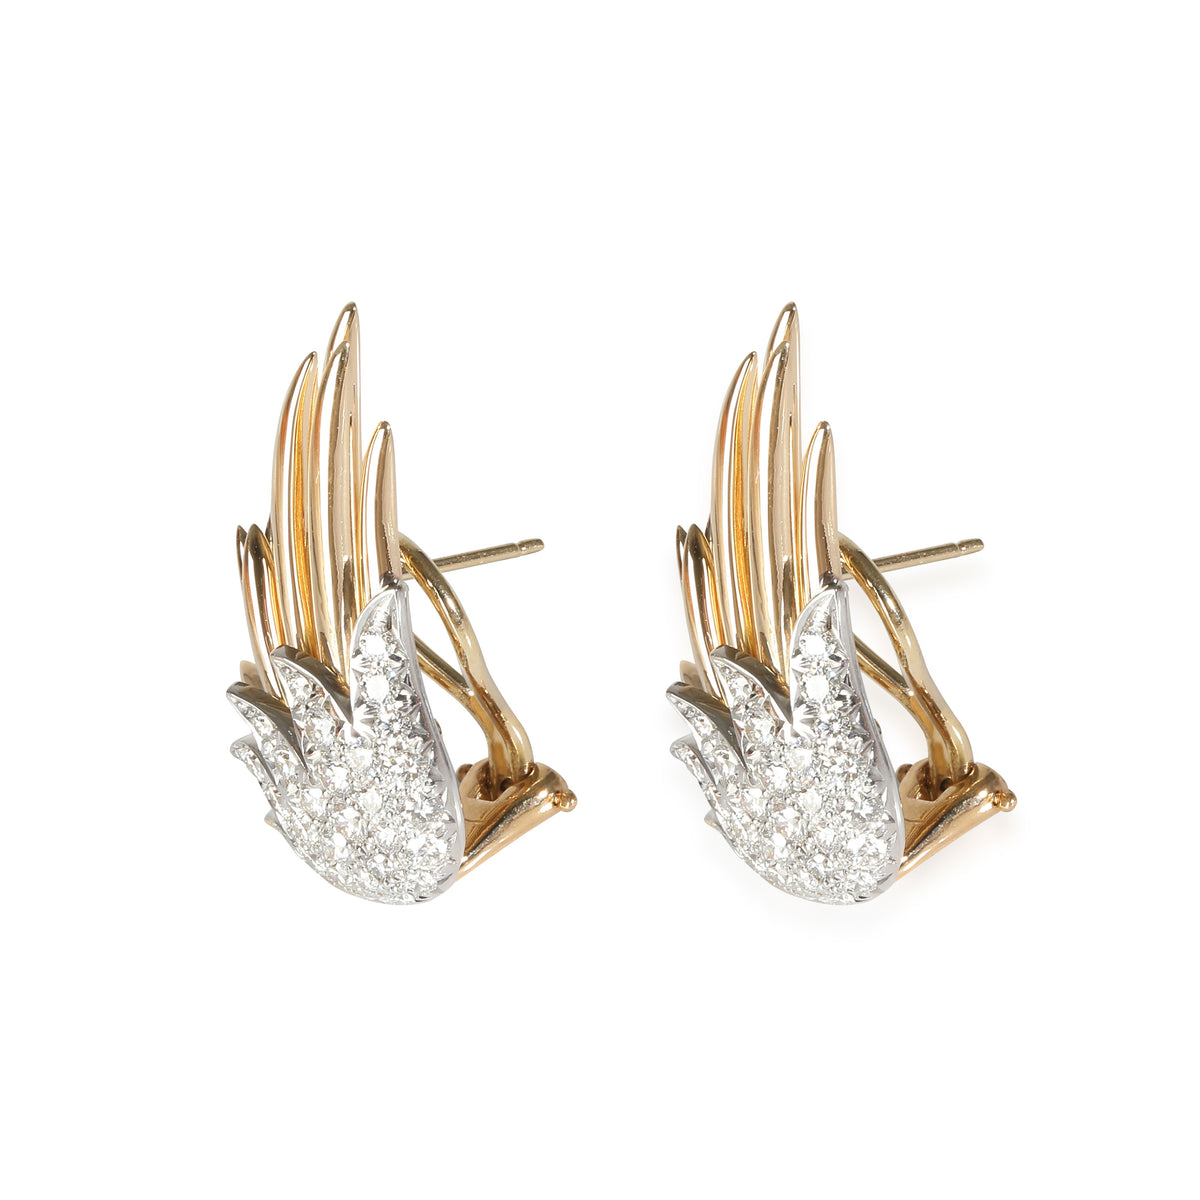 Sclumberger Flame Earrings in 18k Yellow Gold/Platinum 1.86 CTW